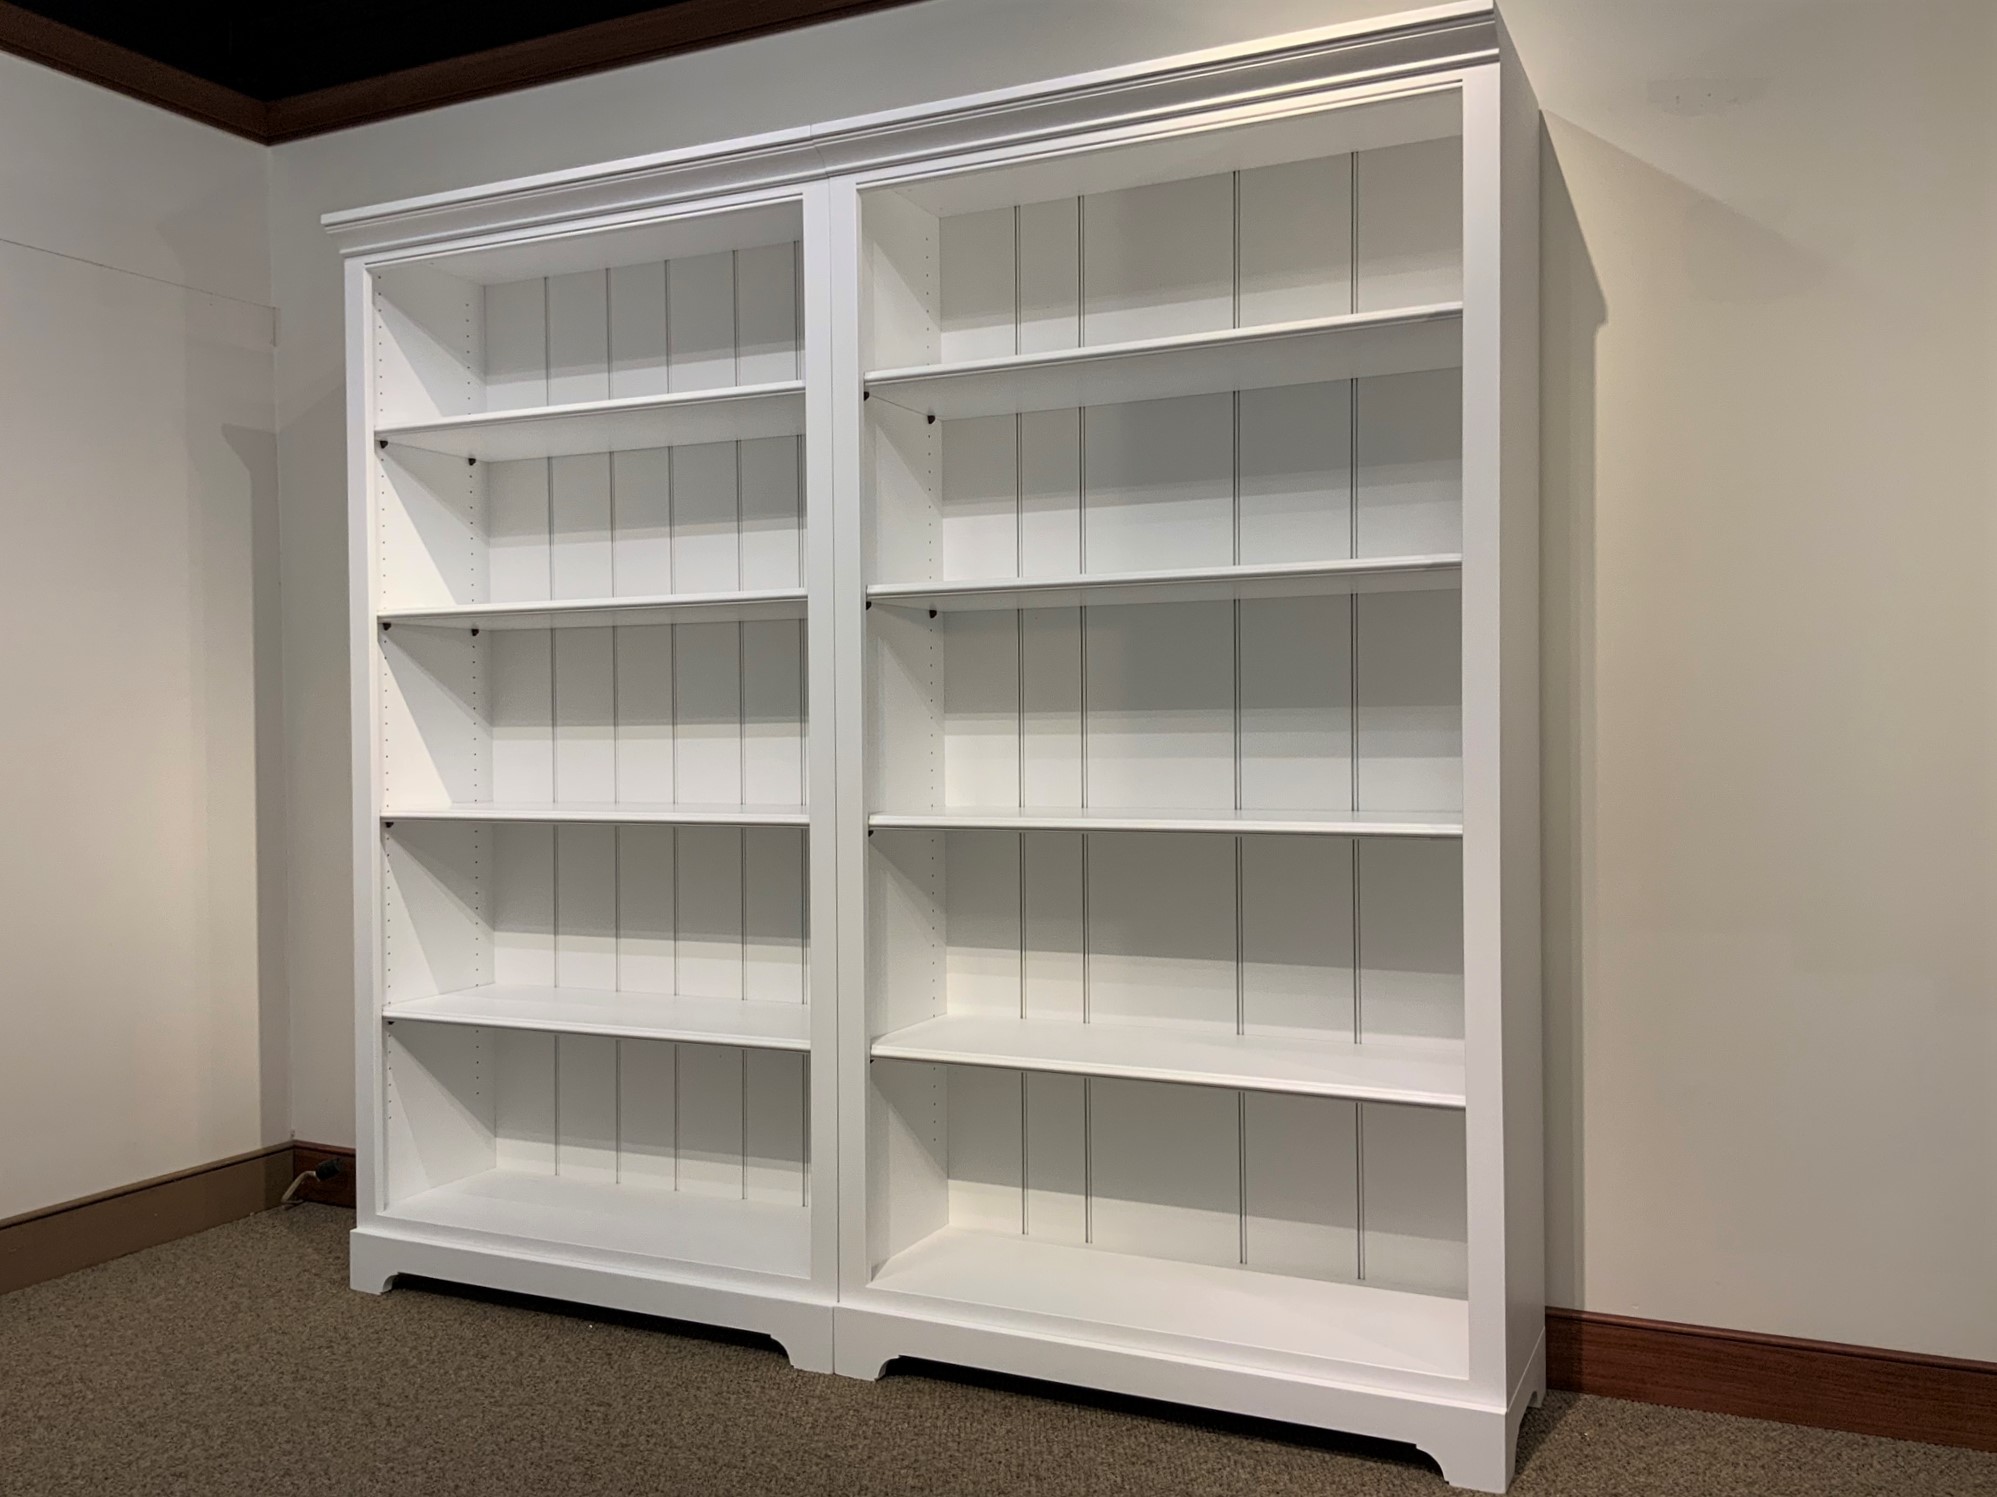 Shaker Bookcases Home Library, 15 Inch Deep Shelving Unit